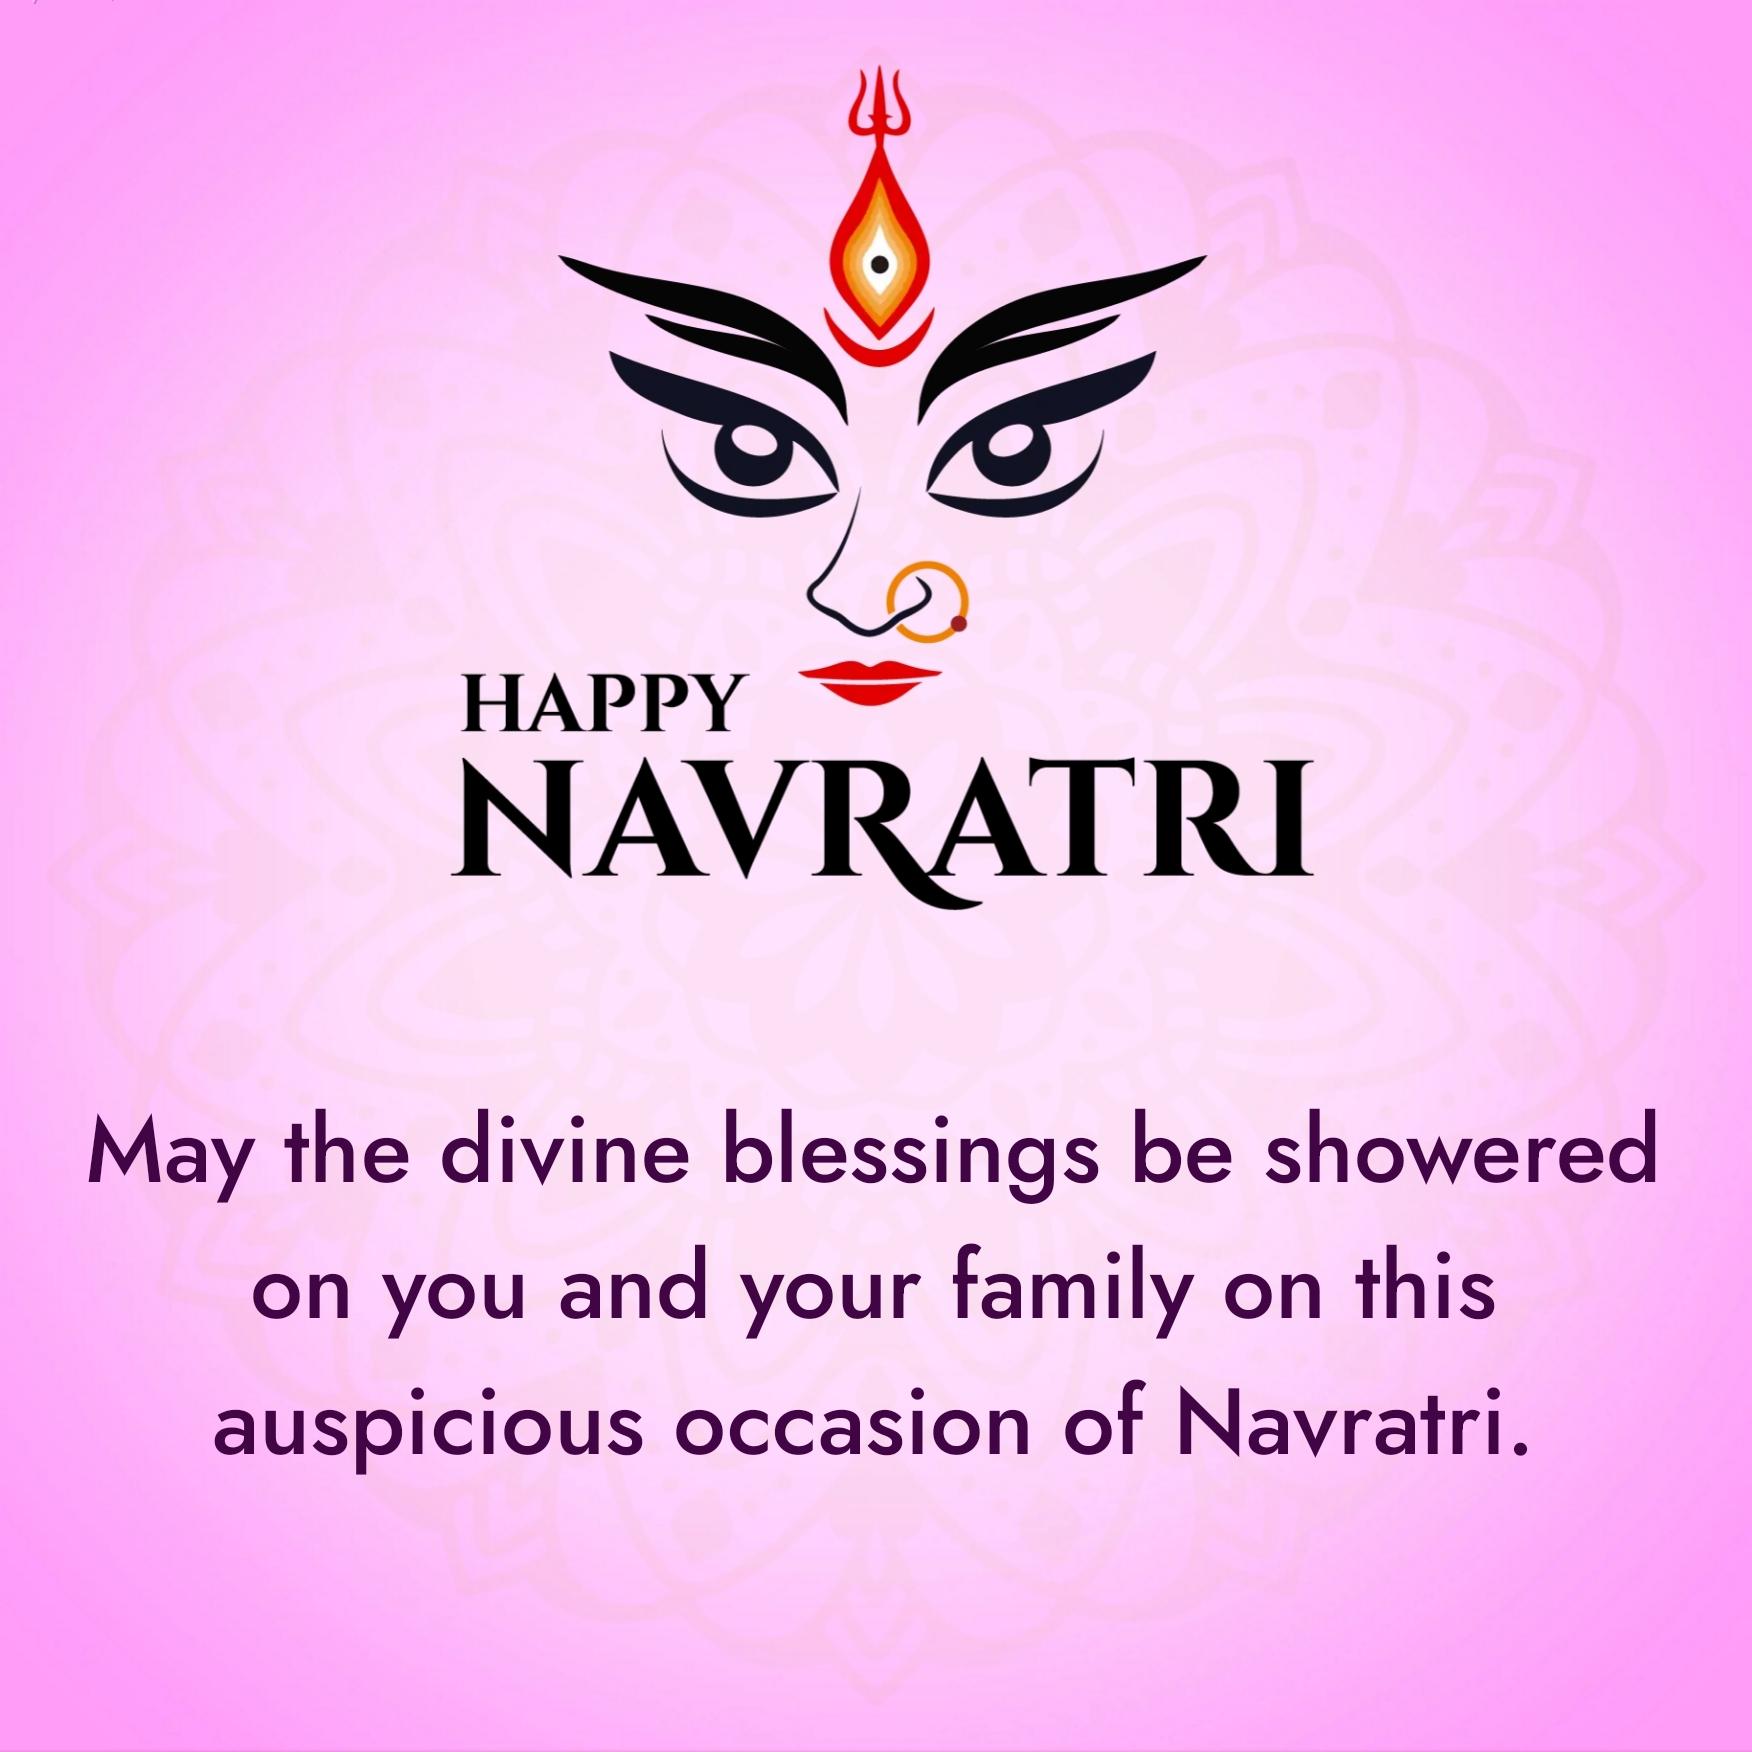 May the divine blessings be showered on you and your family